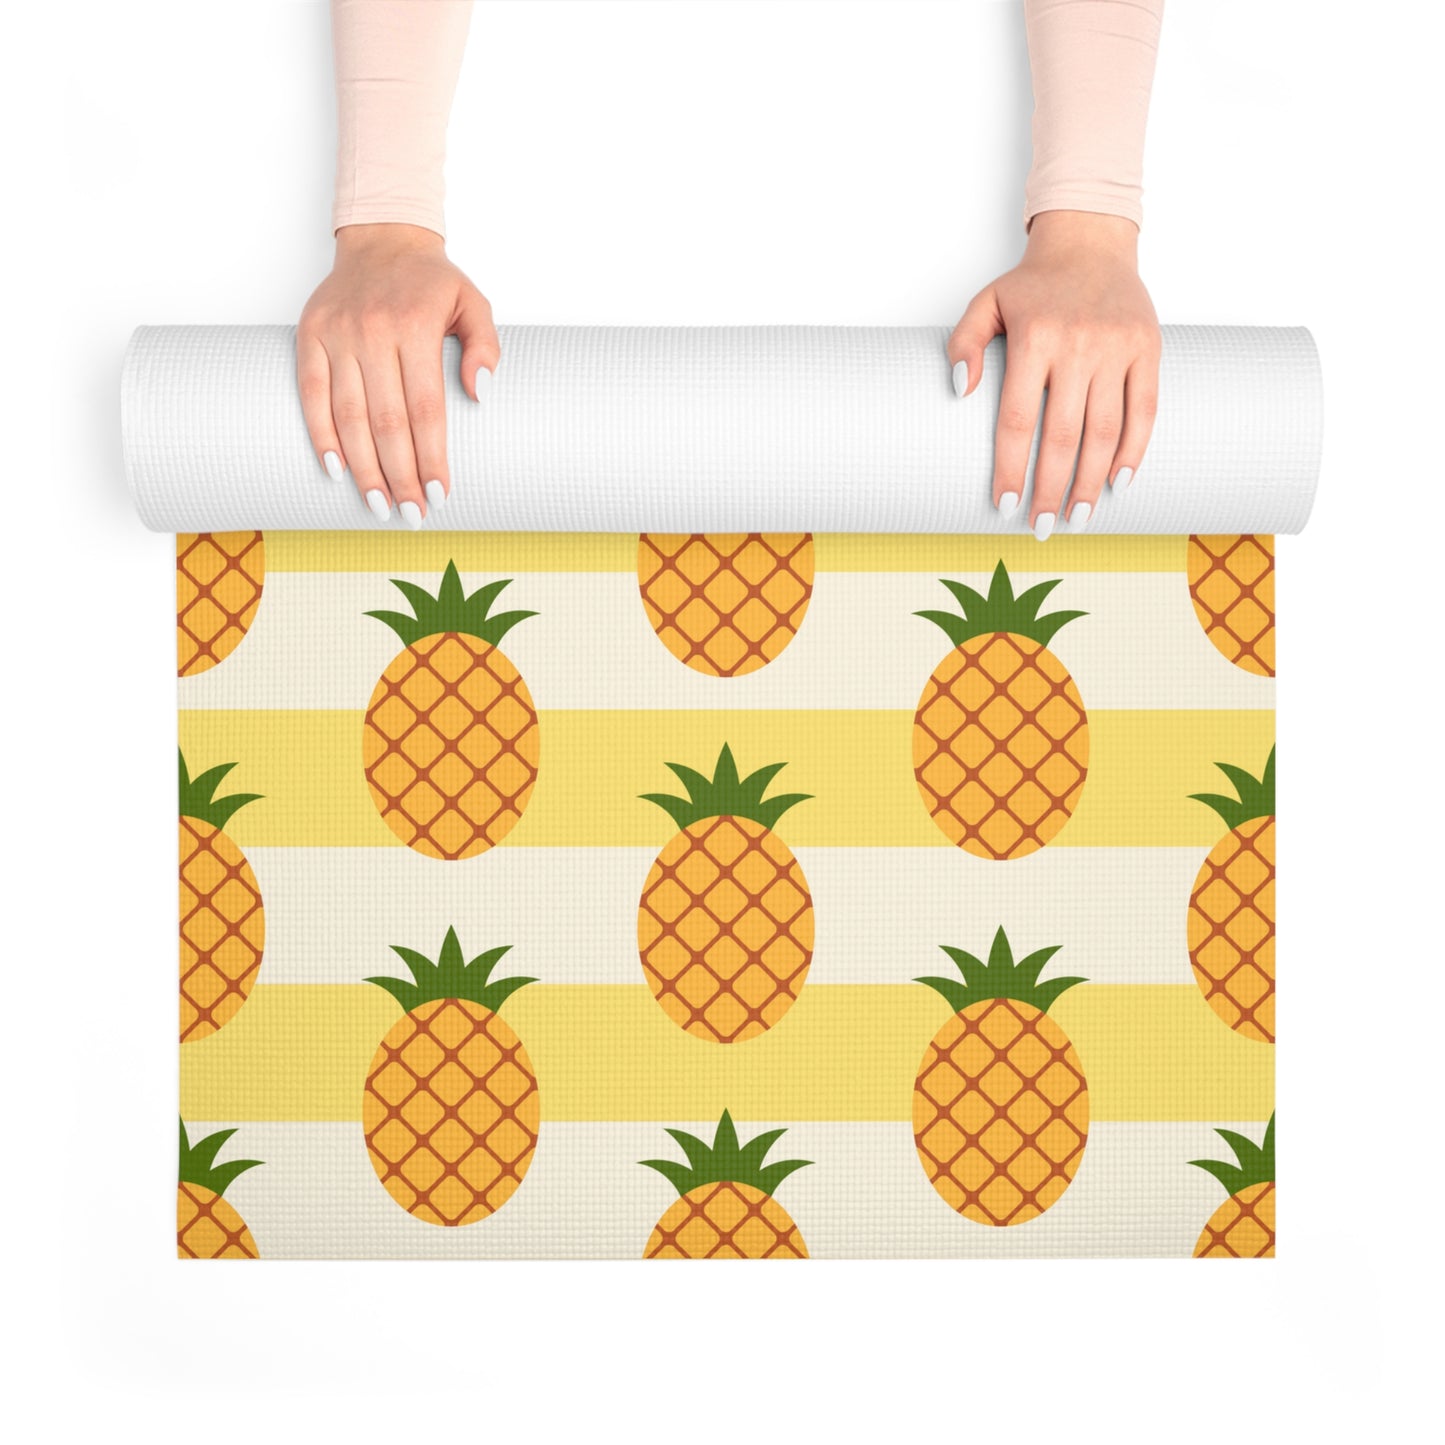 Pineapple Pattern Foam Yoga Mat, Foam Material, Lightweight, and Cushions You From Impacts, 24" x 72" x .25"